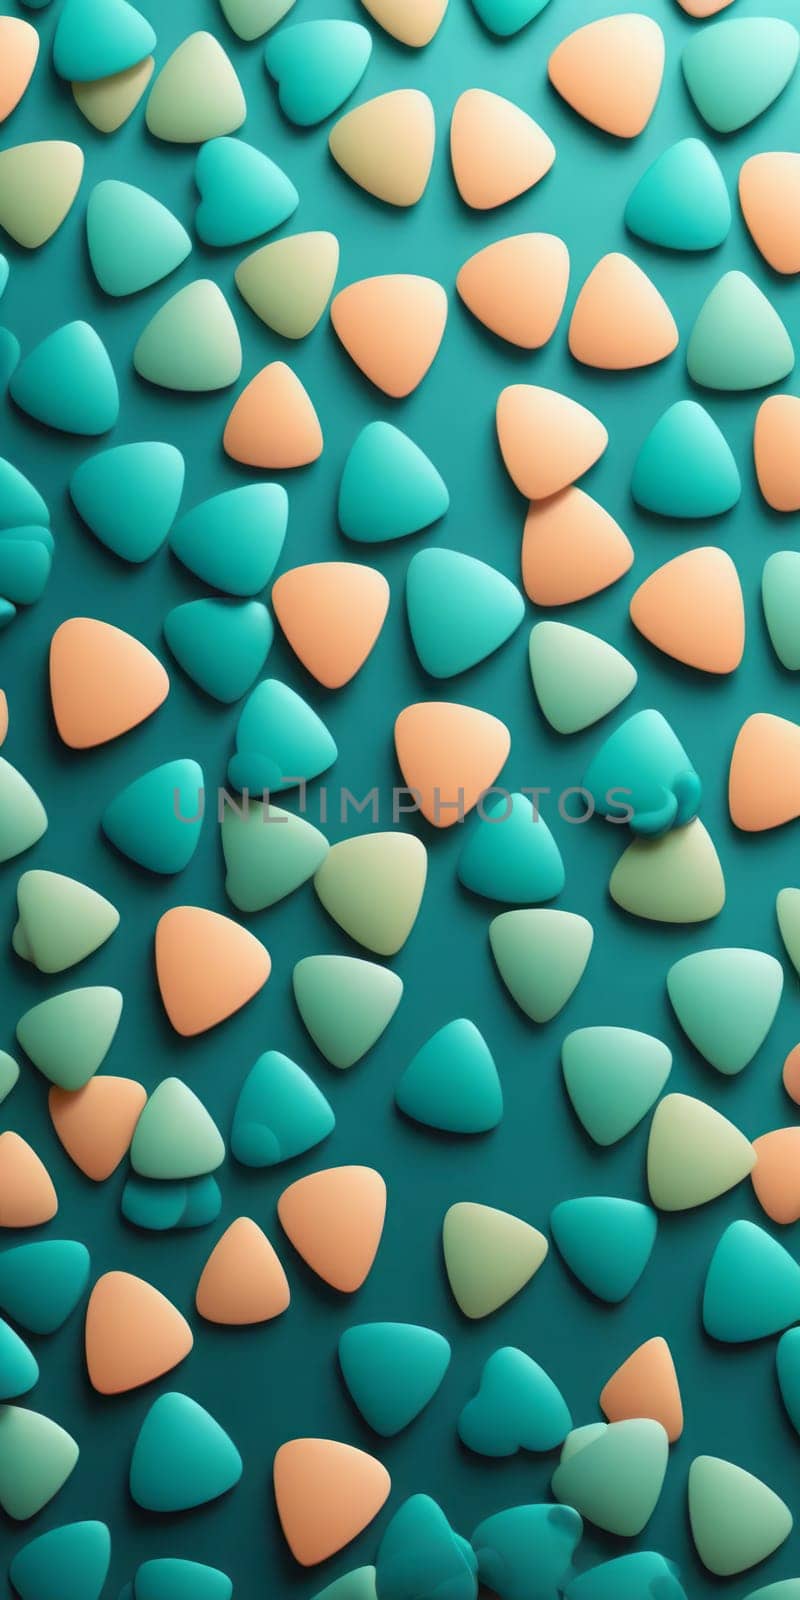 Plectrum Shapes in Teal and Almond by nkotlyar